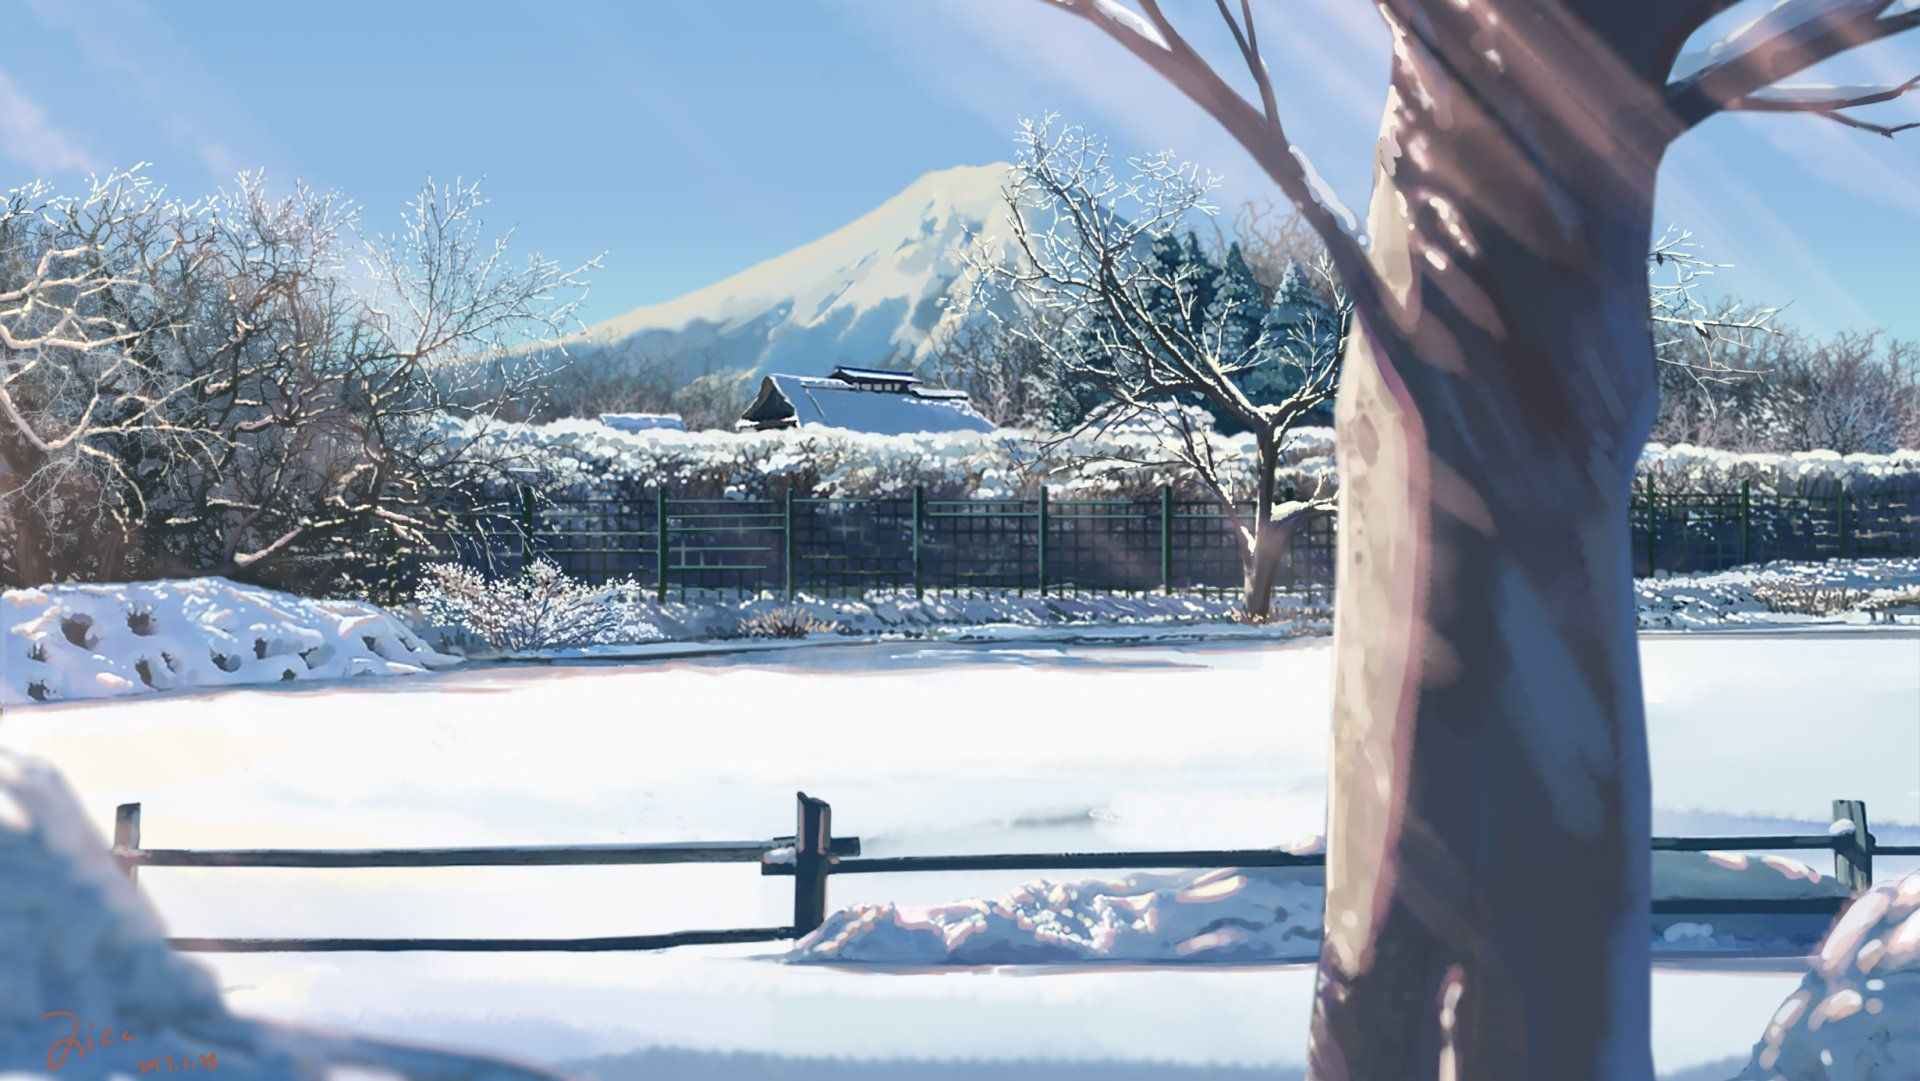 Anime Winter Scenery Wallpapers